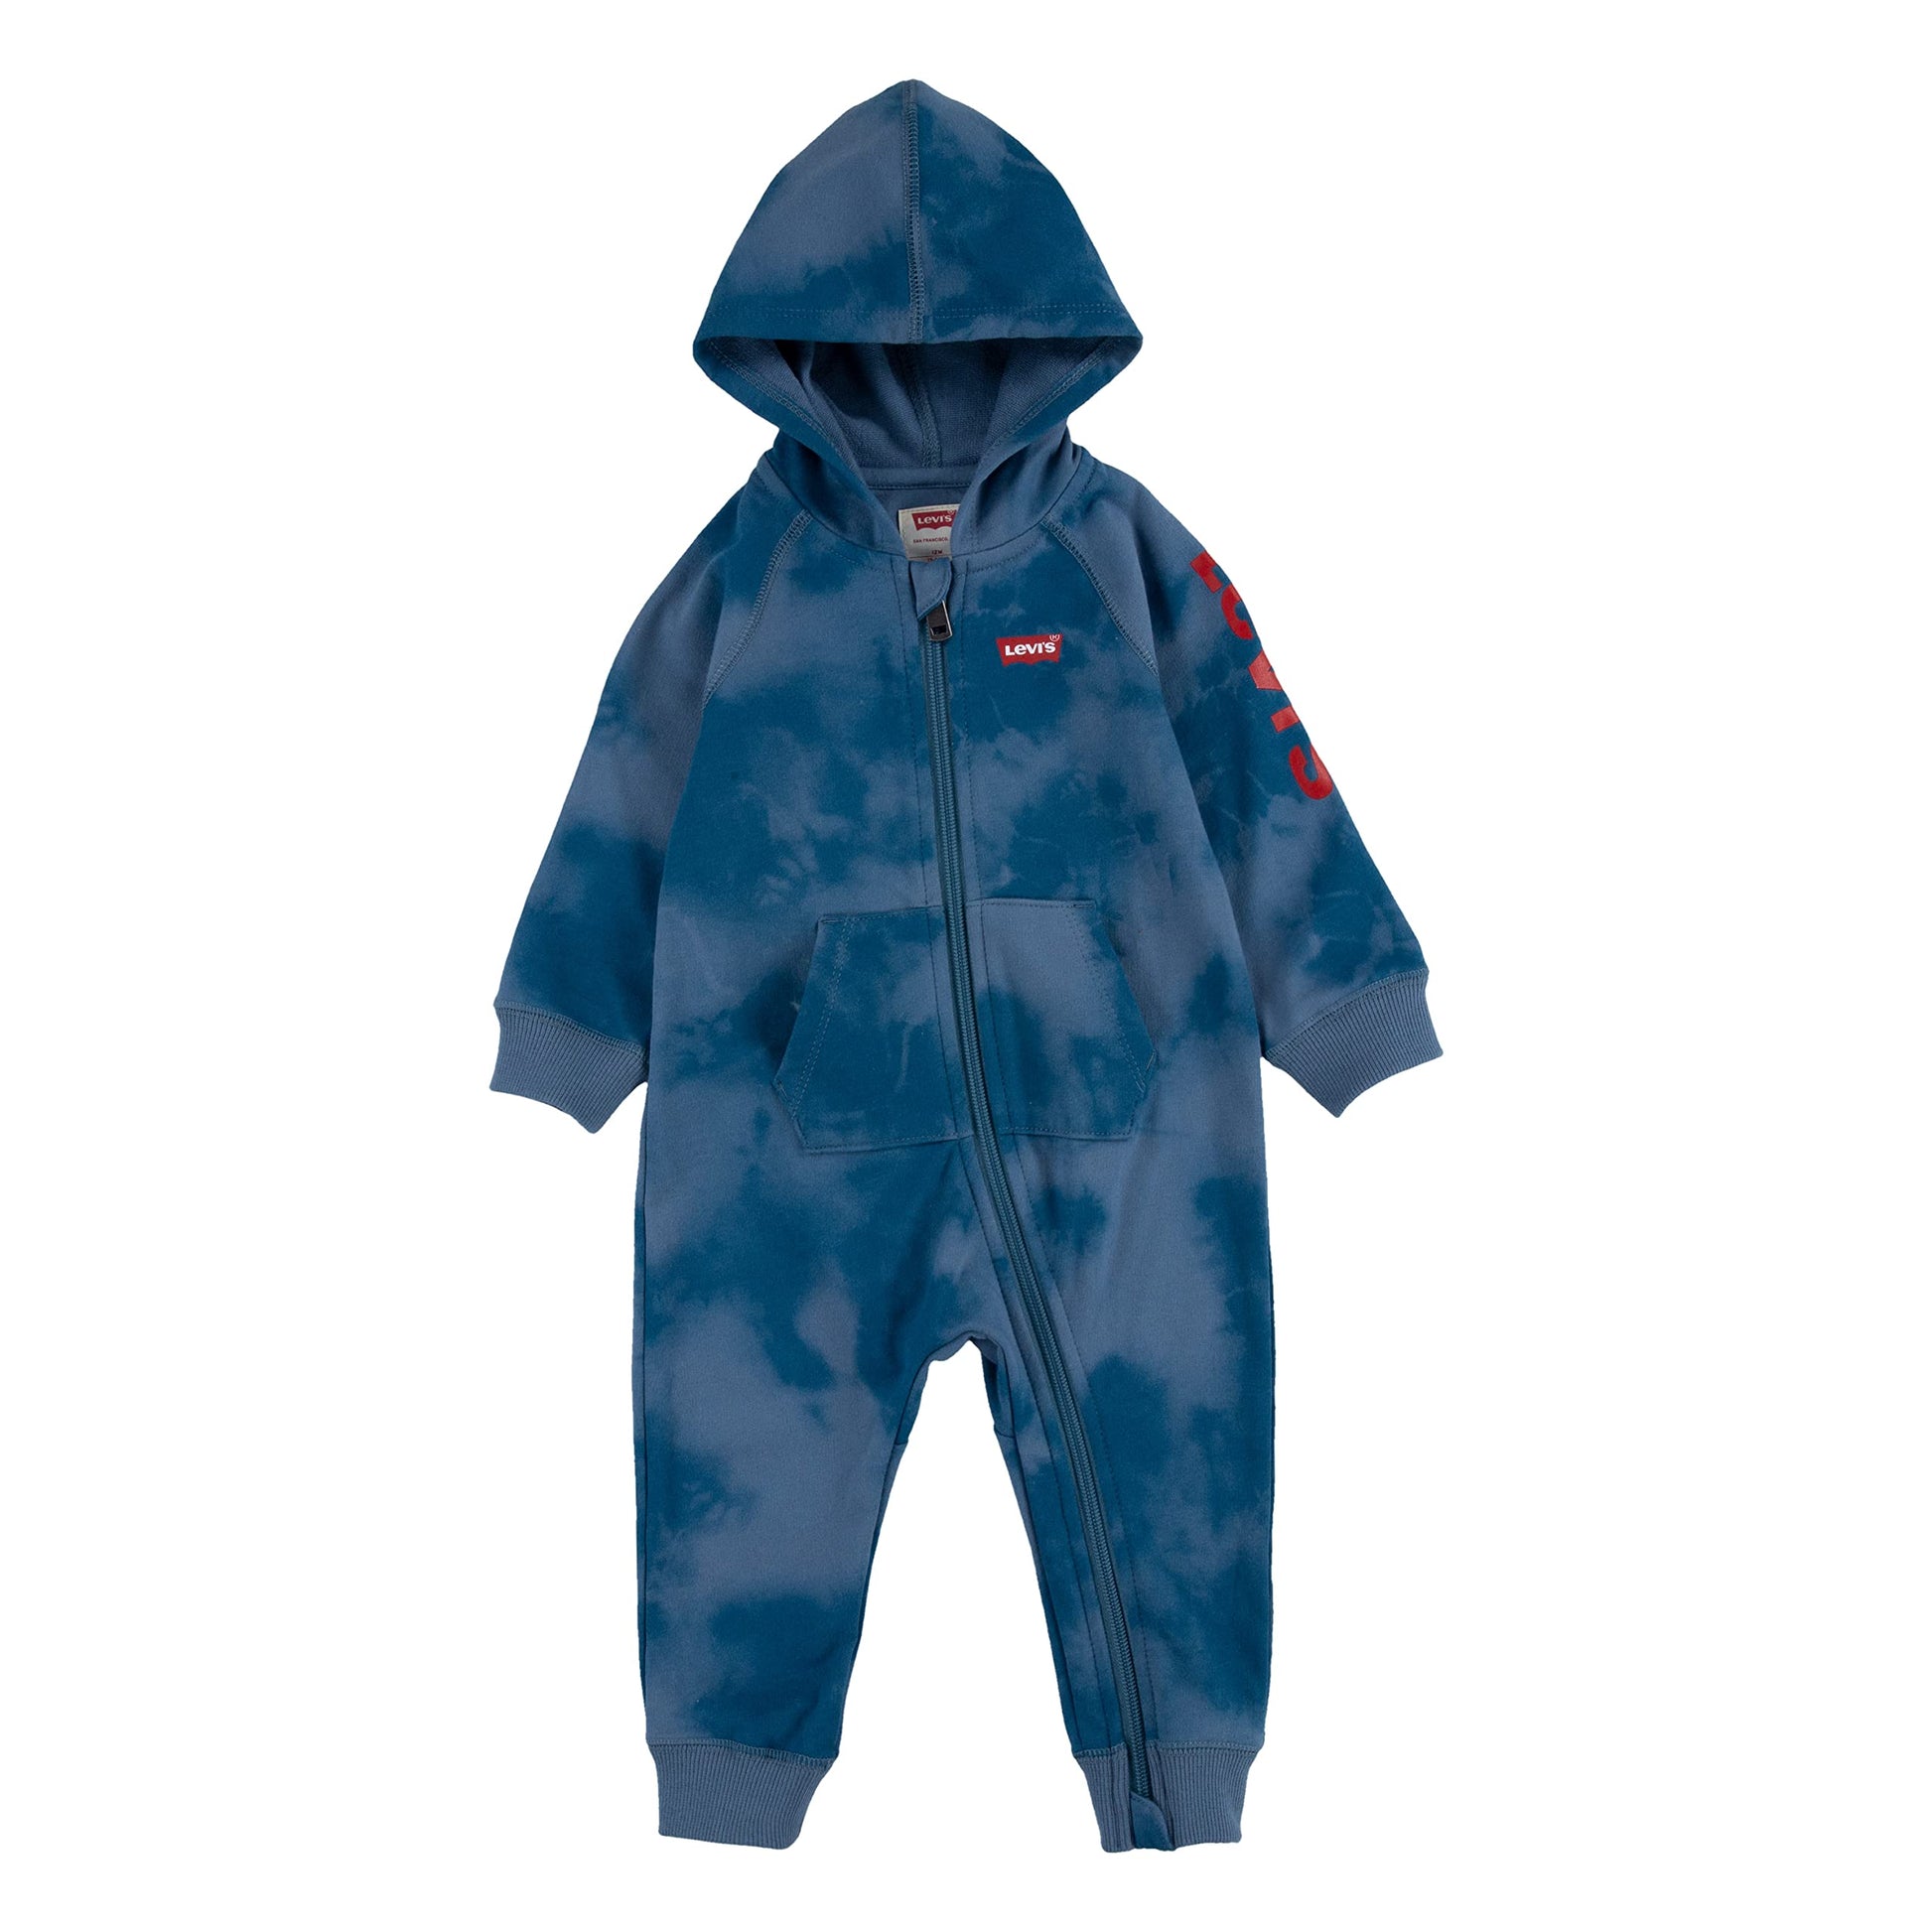 Image 1 of Hooded Printed Coverall (Infant)